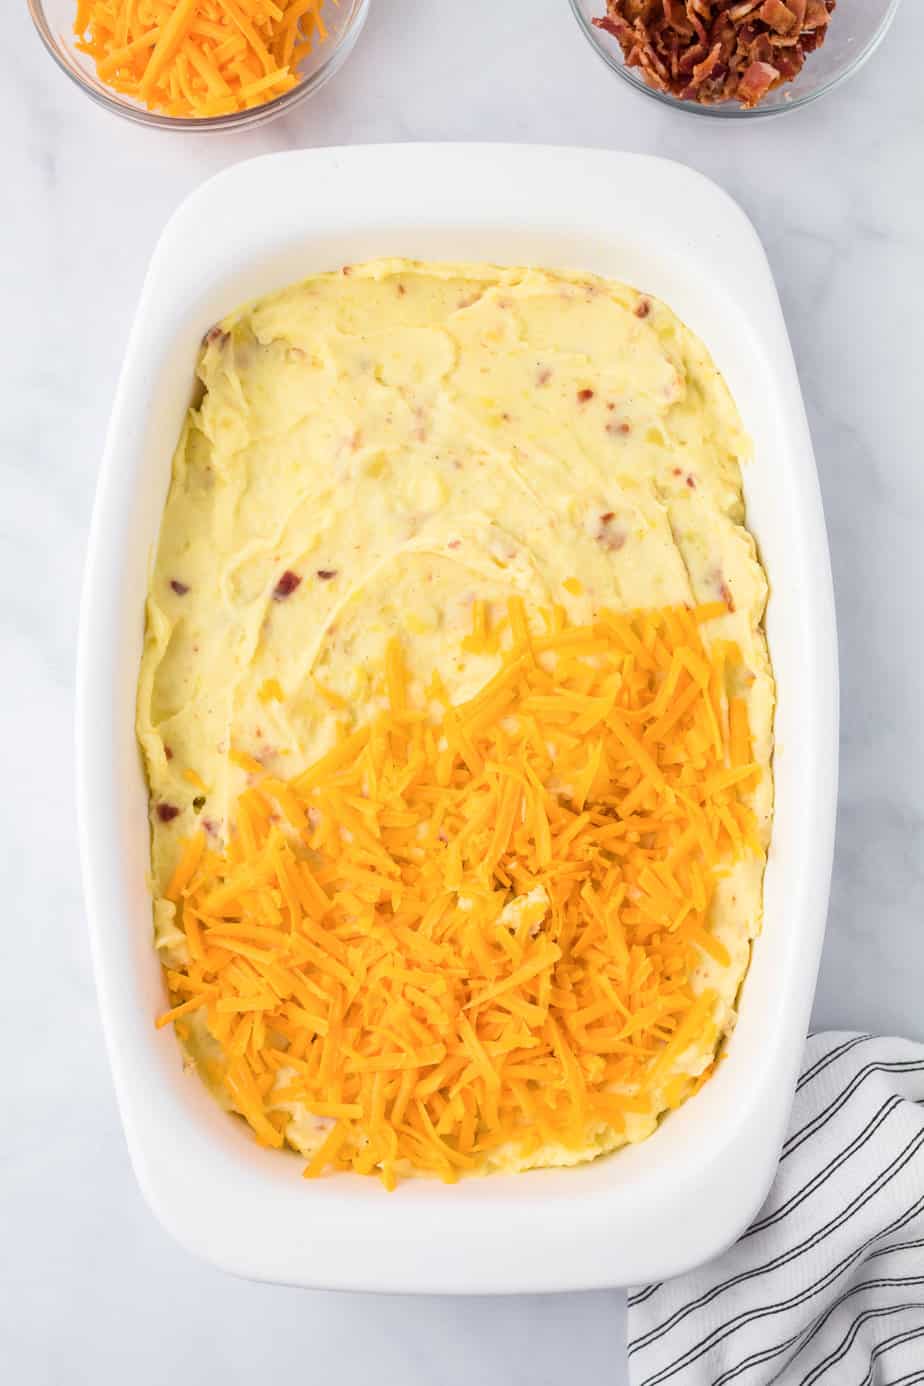 Adding cheese to a pan full of mashed potatoes in a rectangular casserole dish from above on a counter.